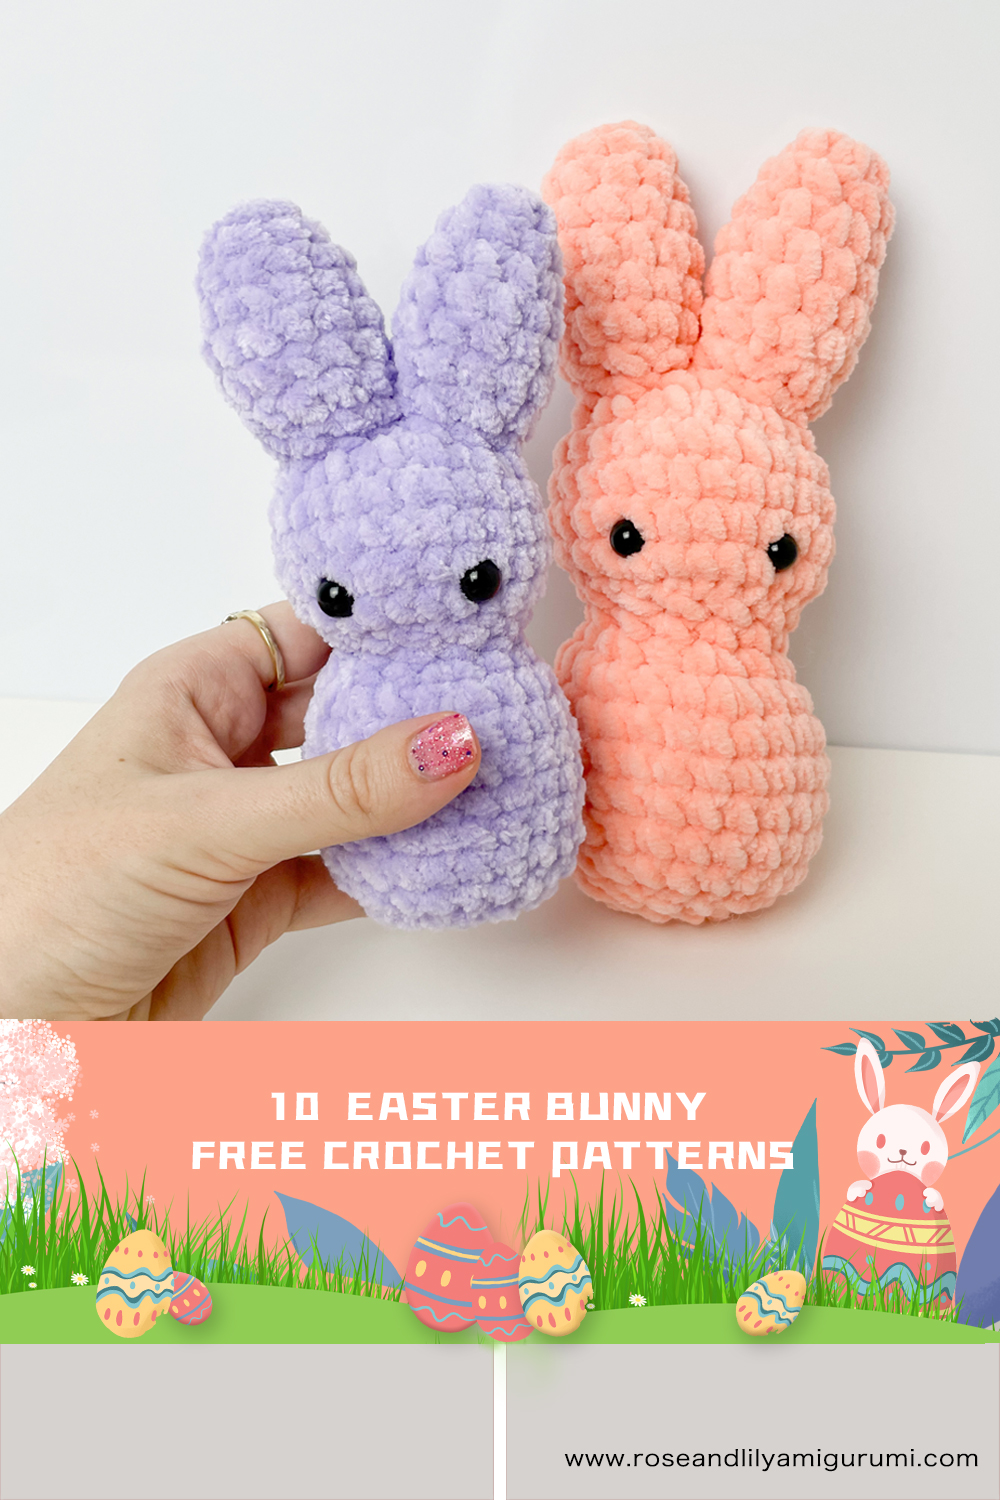 10 Easter Bunny FREE Crochet Patterns 